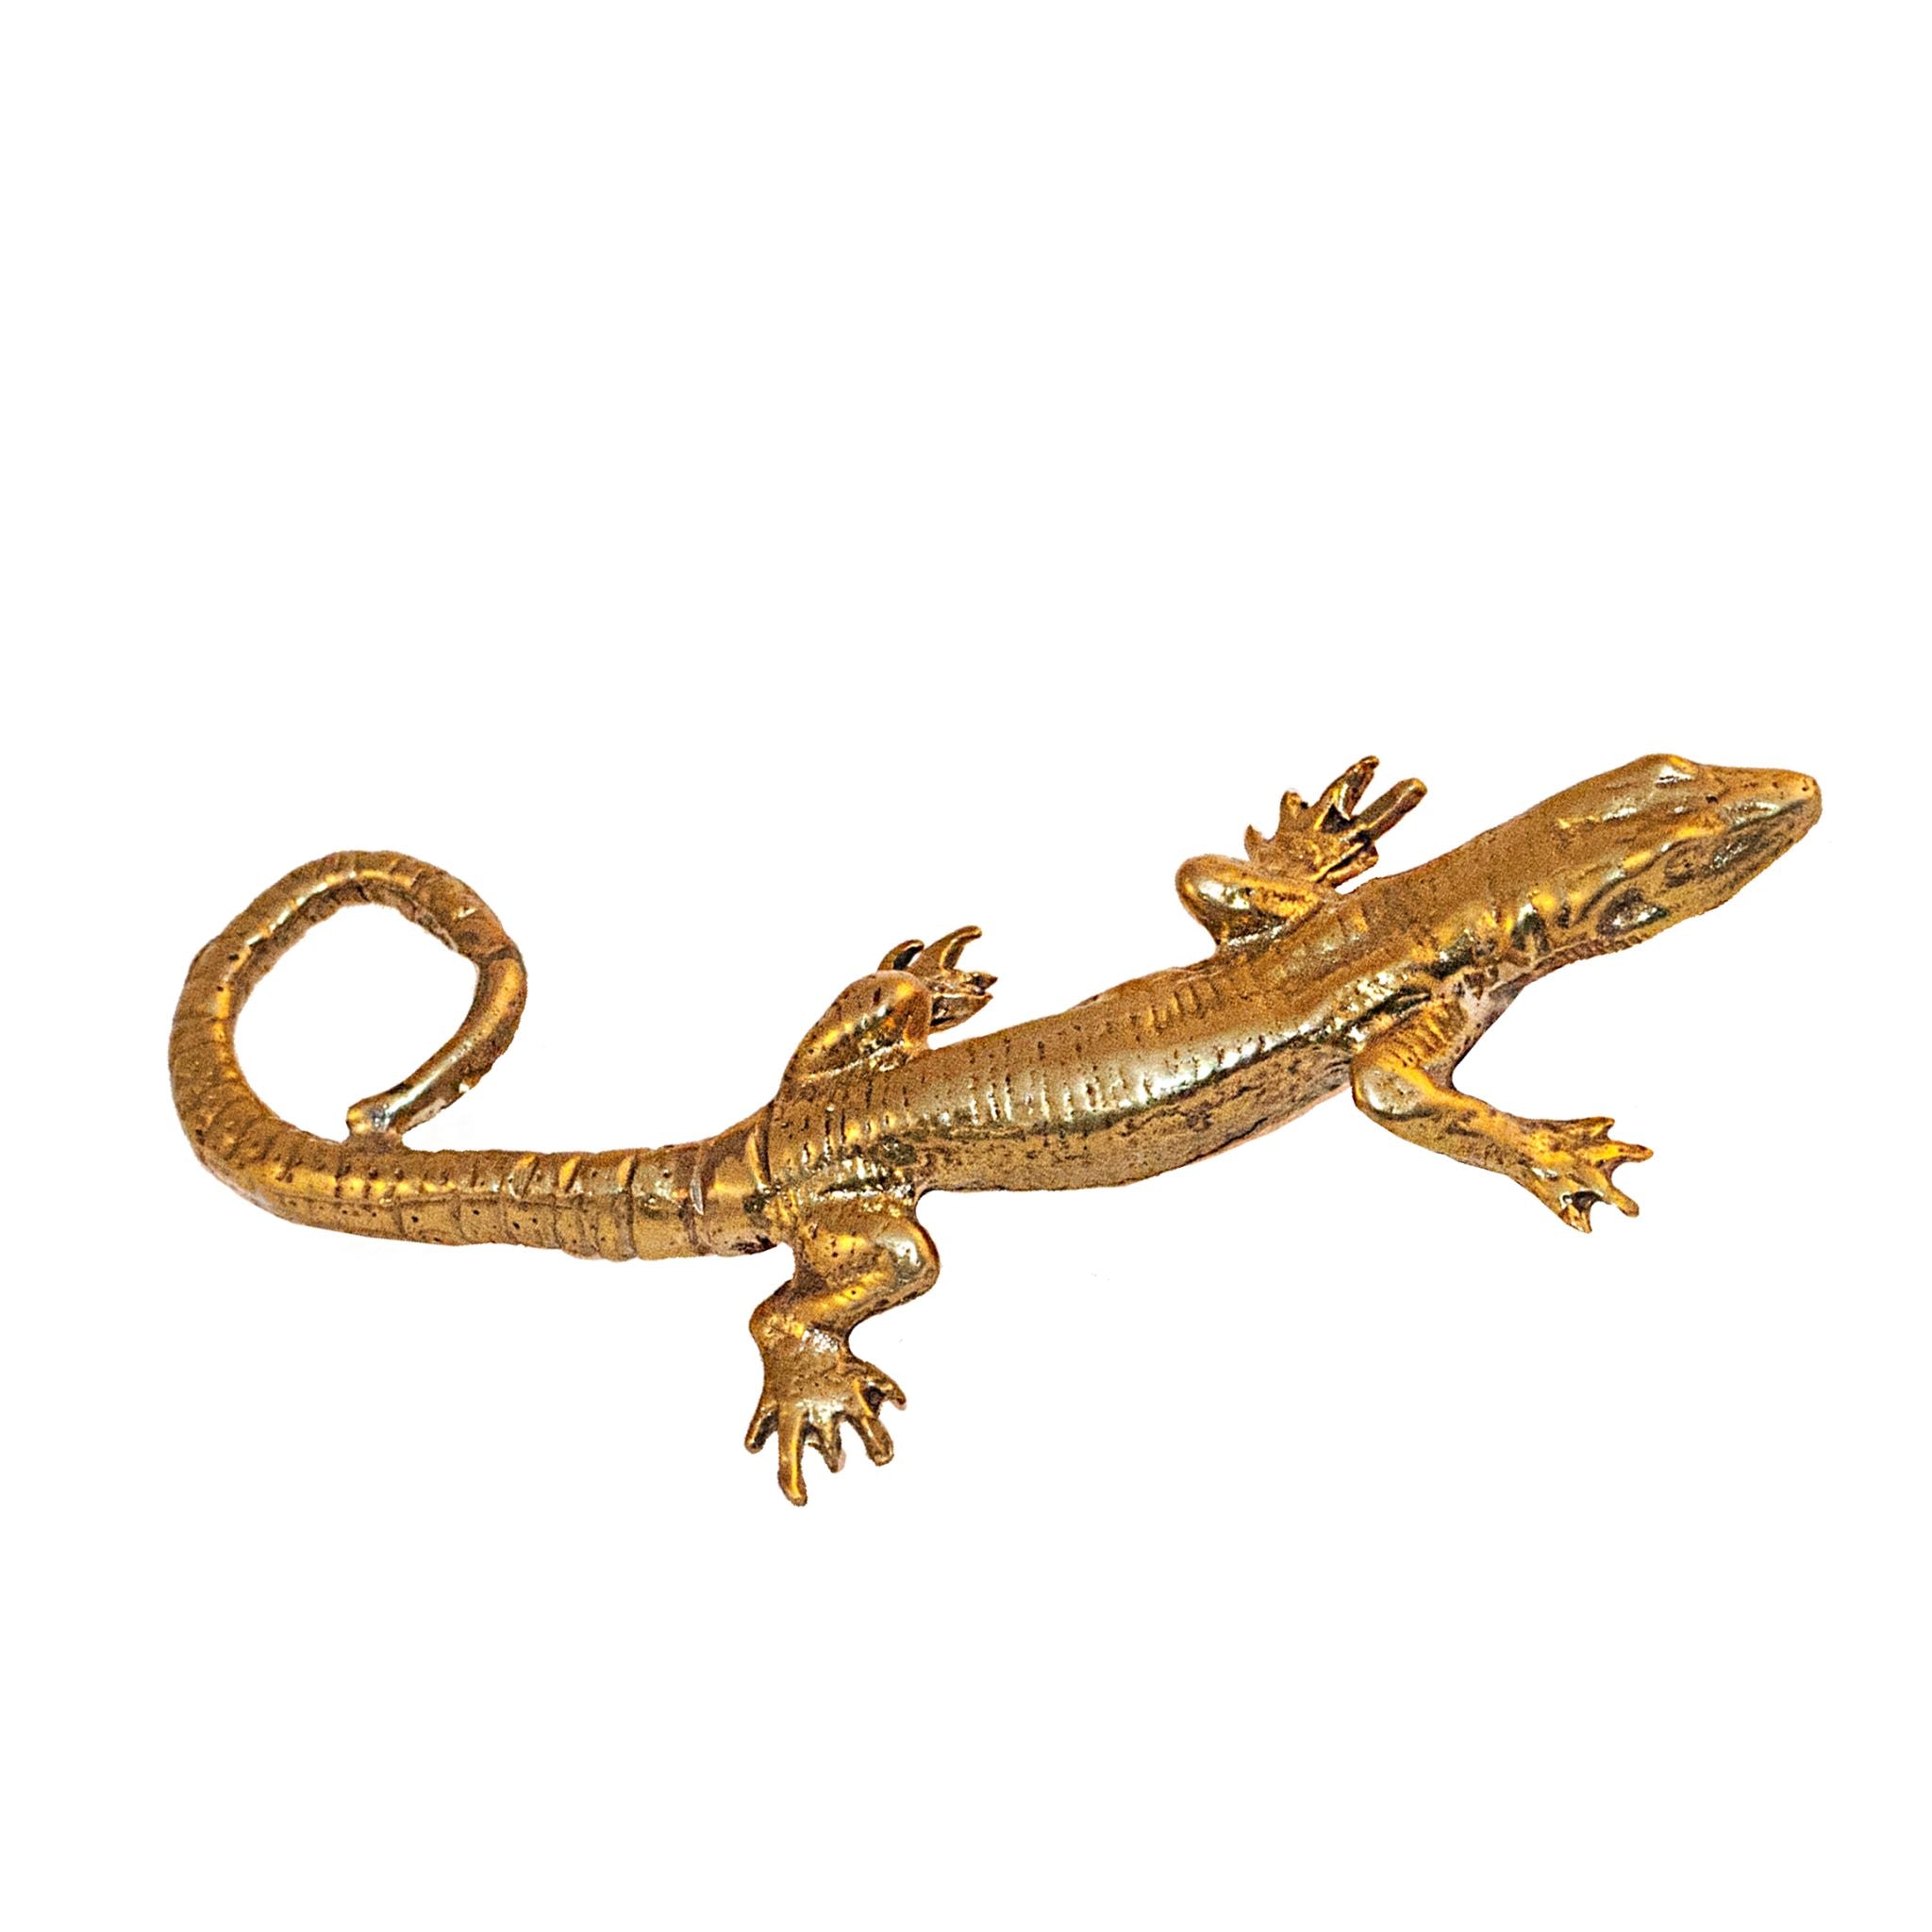 A small brass knob shaped like a lizard, featuring detailed craftsmanship.